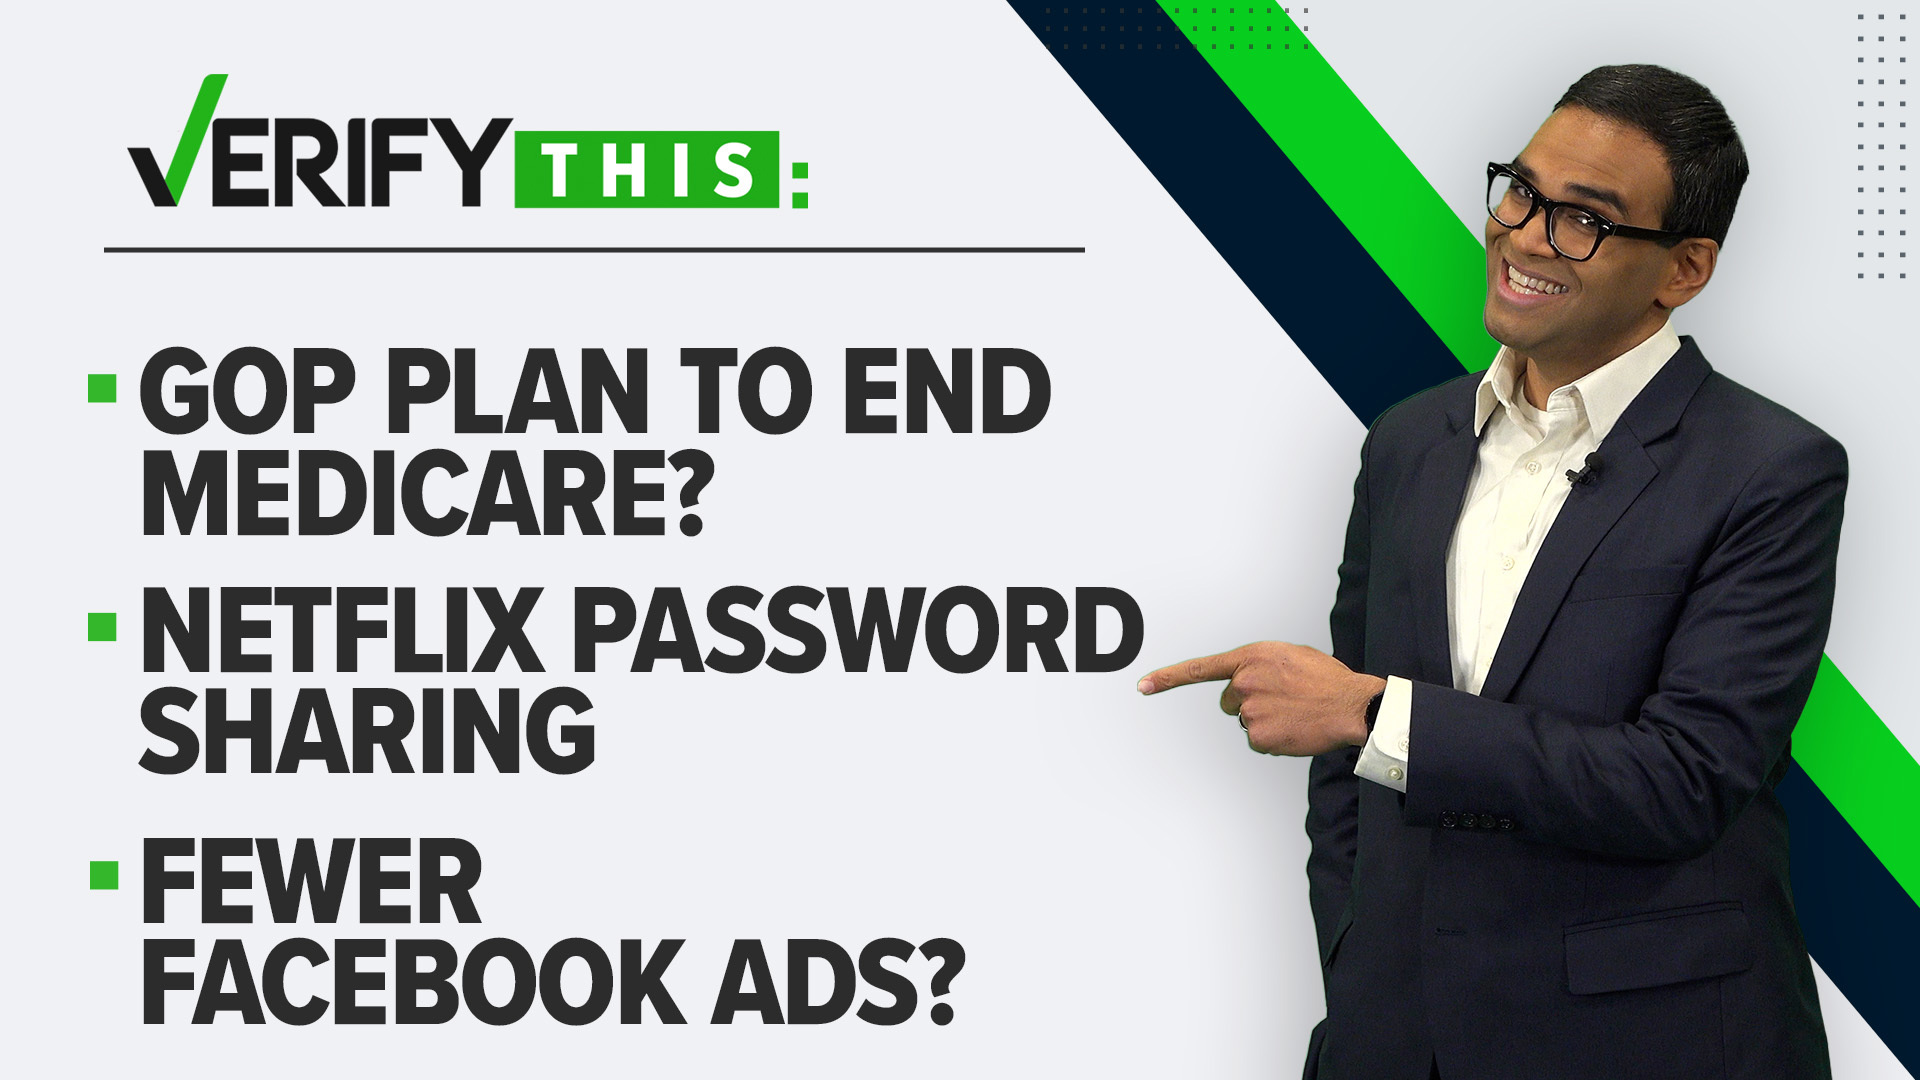 Answering your questions about extra social security benefits, GOP Medicare plan, Netflix password sharing and more.